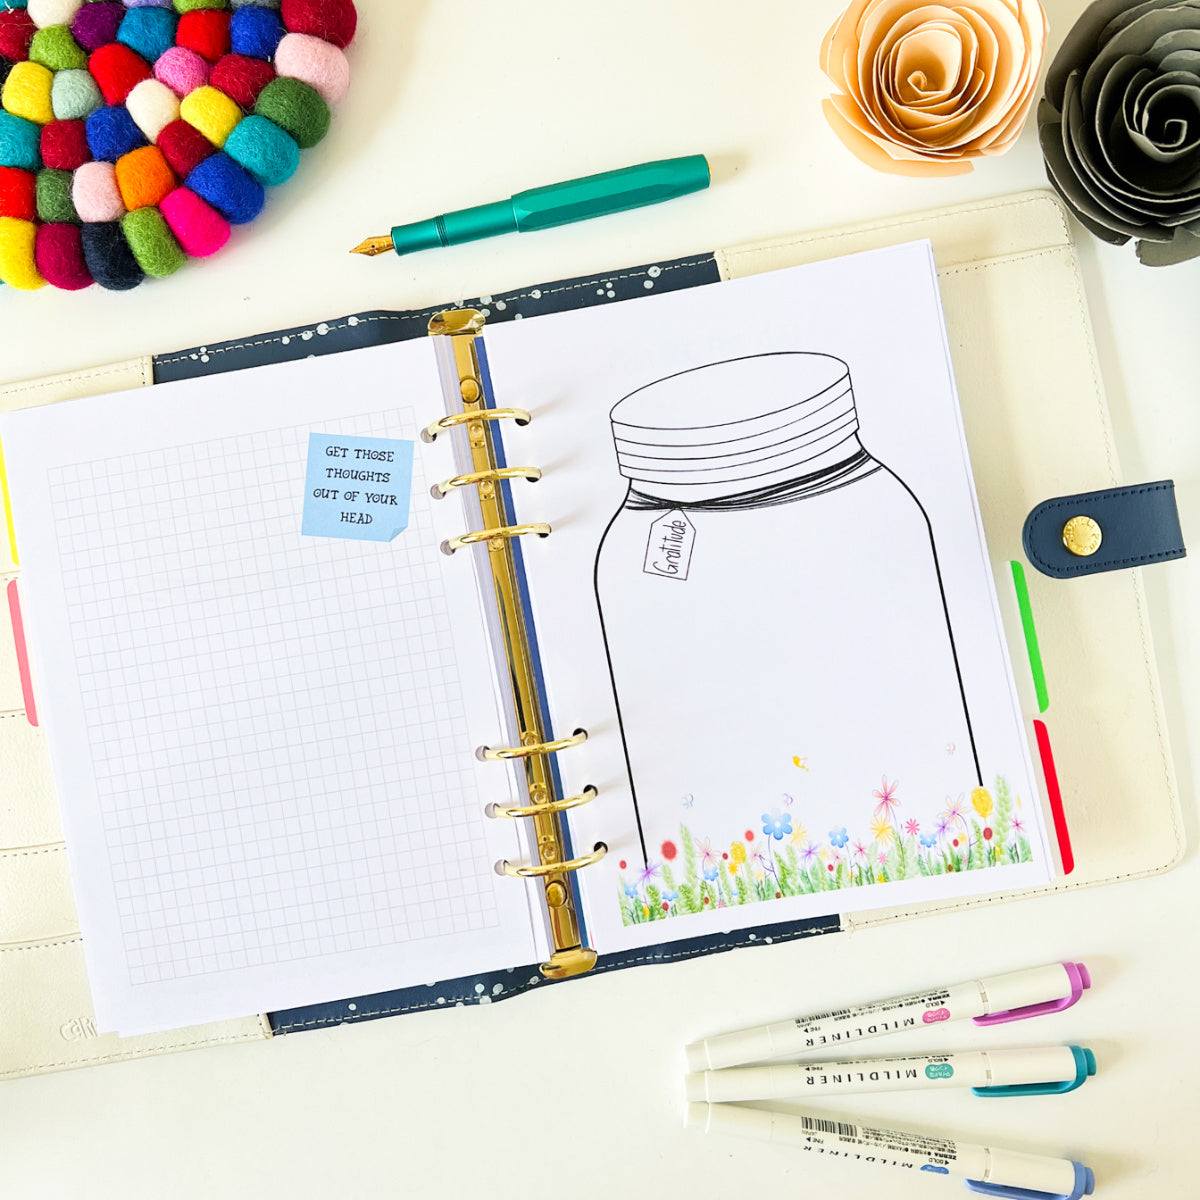 An open notebook with a drawing of a Gratitude Jar and flowers on the right page and a grid pattern with a sticky note saying, "Get those thoughts out of your head" on the left page. Around it are colorful pens, a felt ball coaster, and paper flowers creating a charming floral border.